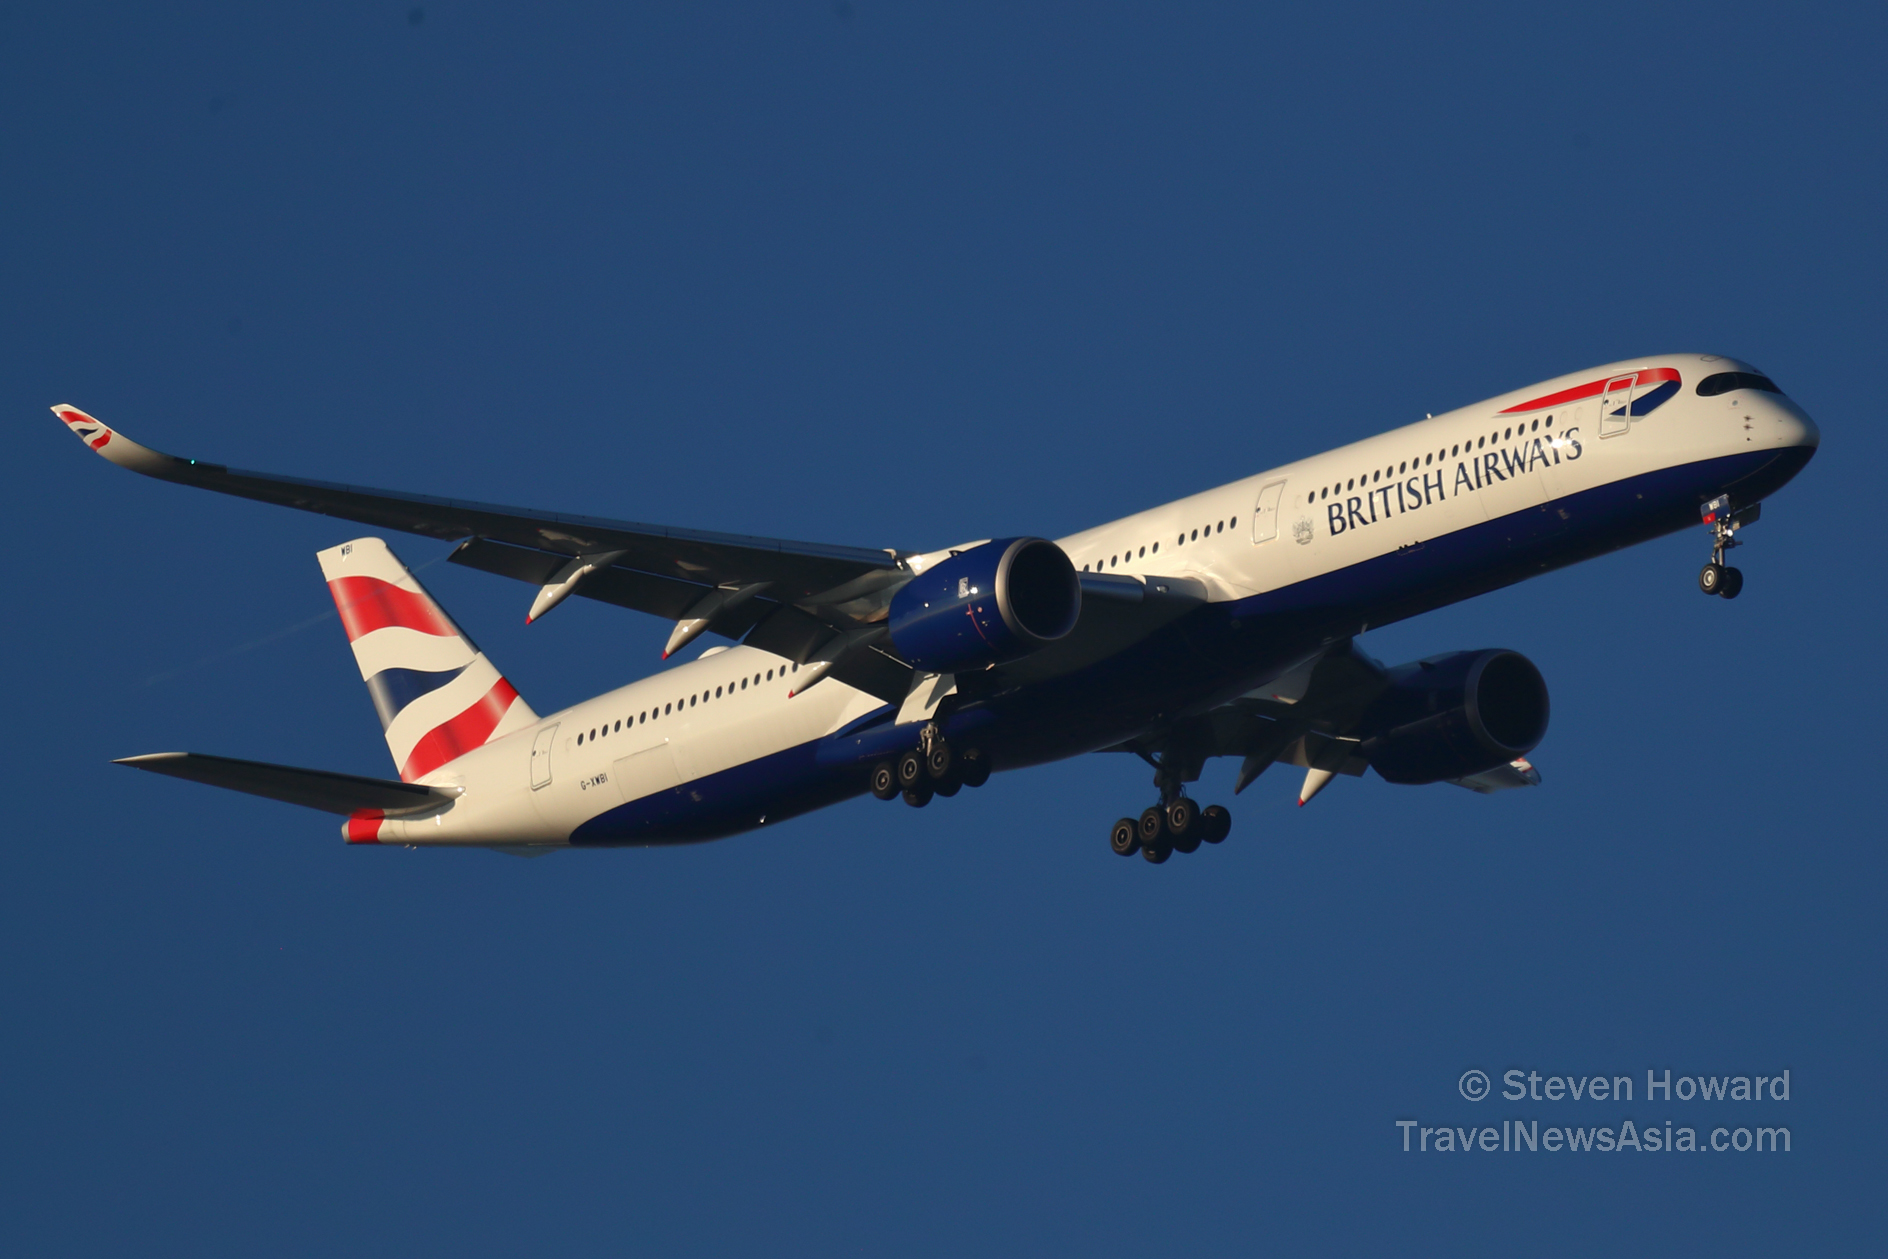 British Airways A350-1000 reg: G-XWBI. Picture by Steven Howard of TravelNewsAsia.com Click to enlarge.